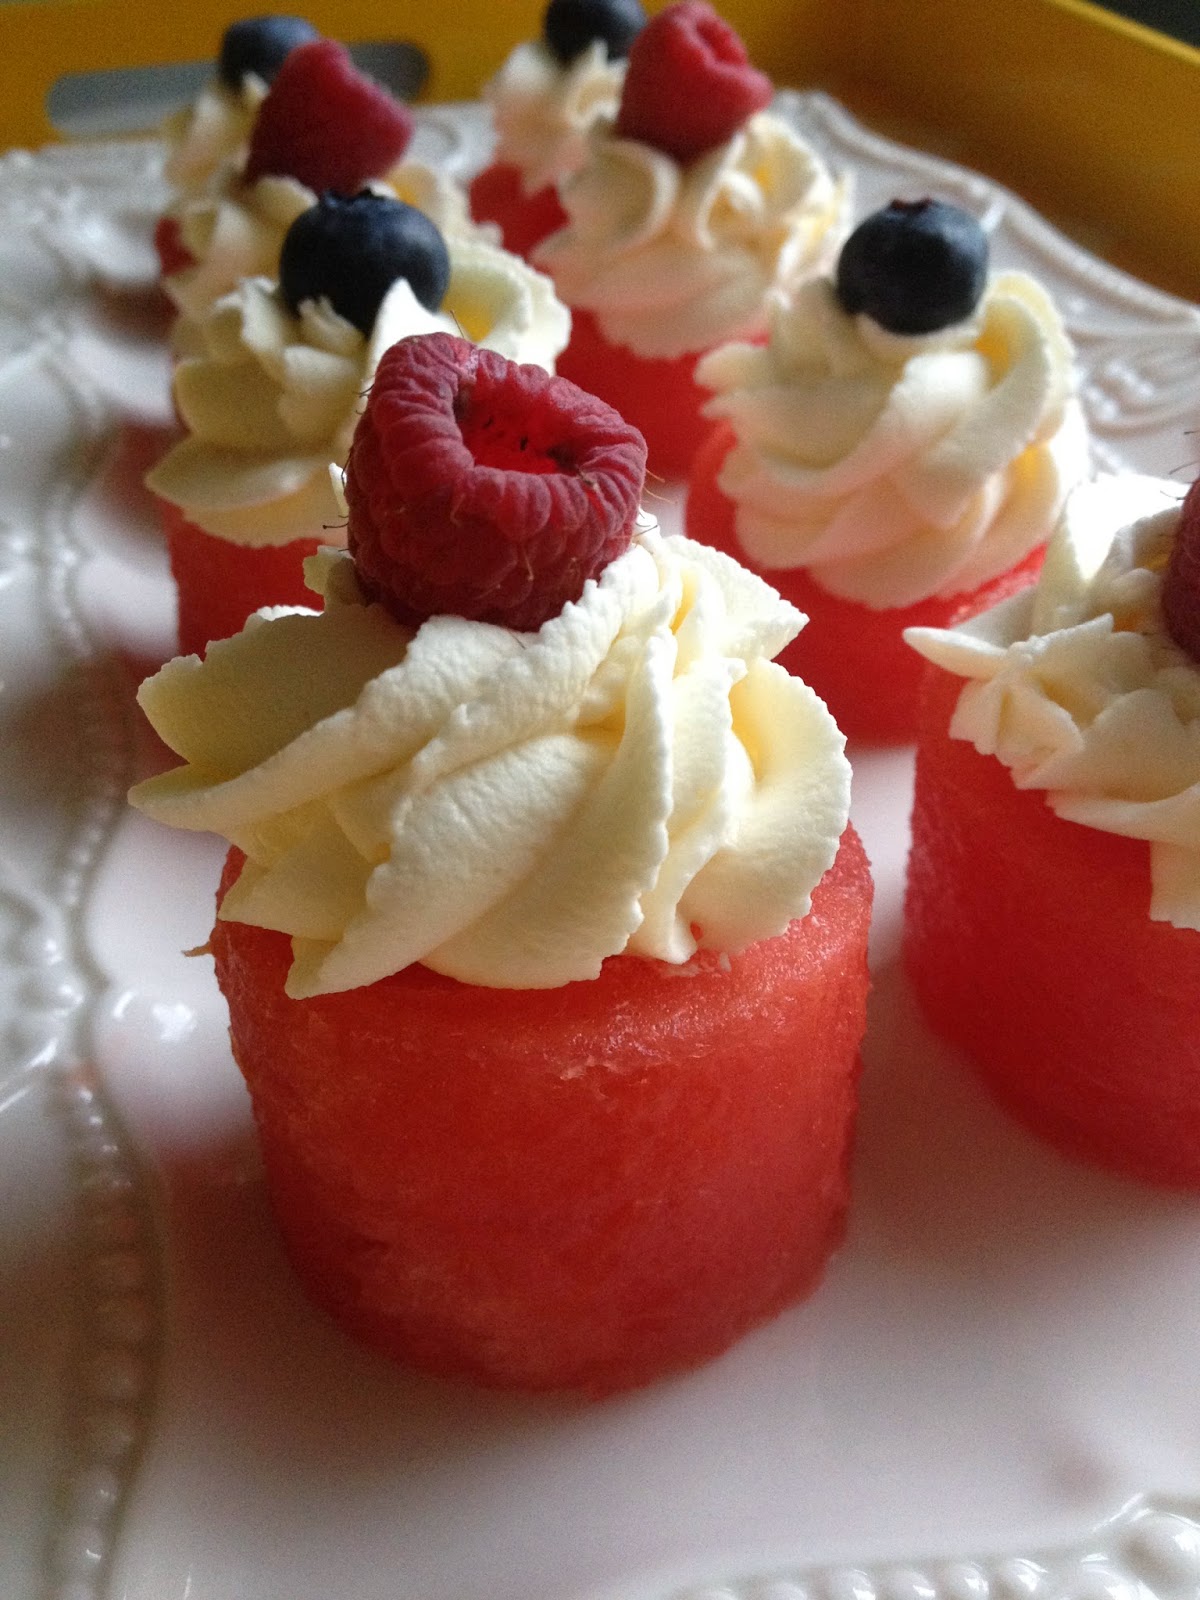 Watermelon cupcakes. Get more recipes for healthy 4th of July desserts at EatingRichly.com. 